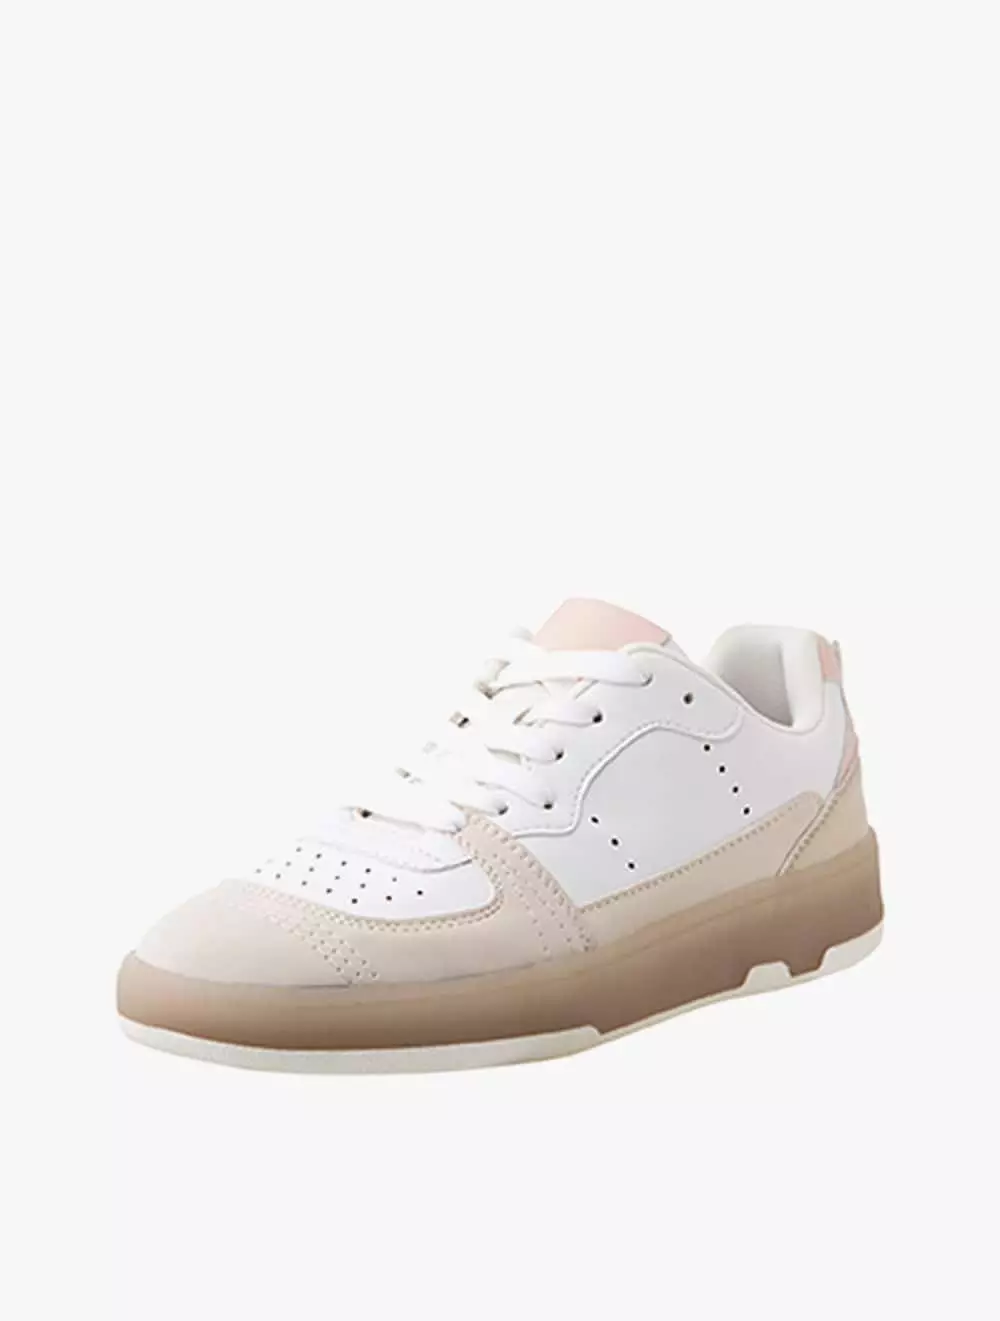 Jual PAYLESS Payless Brash Royalty Womens Court Sneakers - White_15 ...